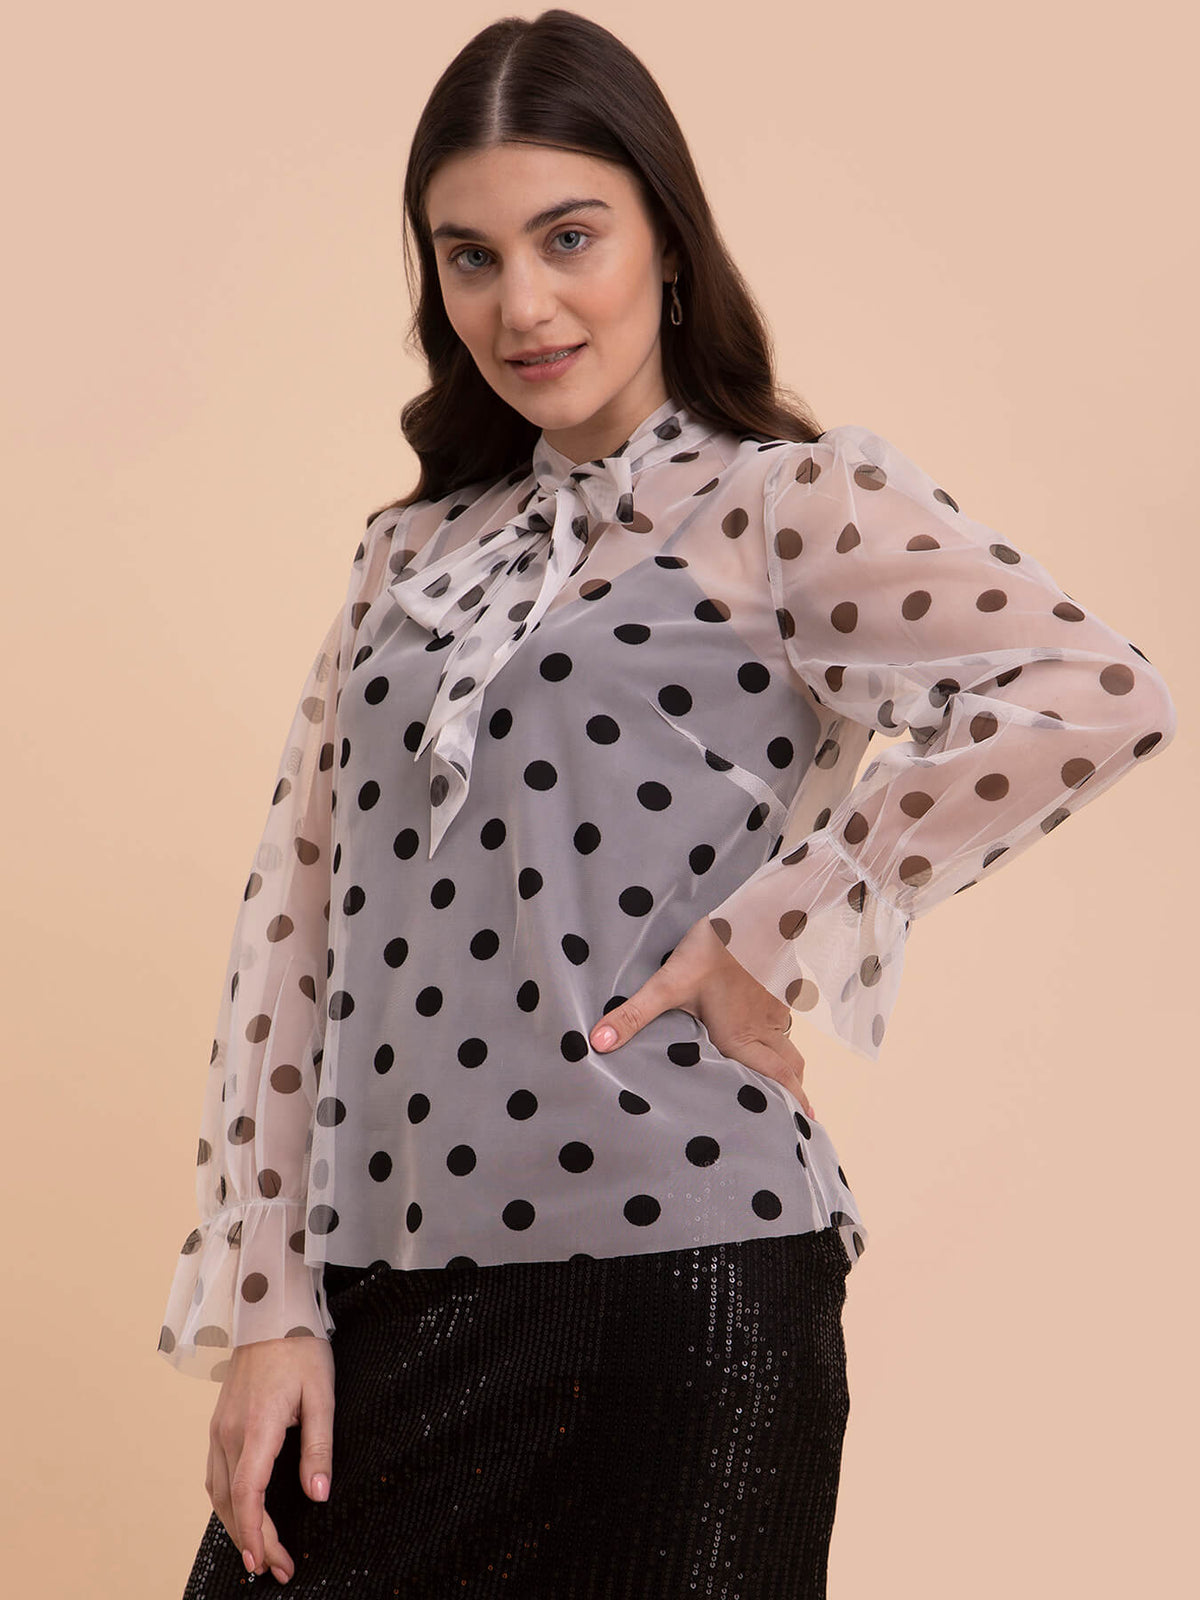 Tie Up Polka Print Net Top - White and Black